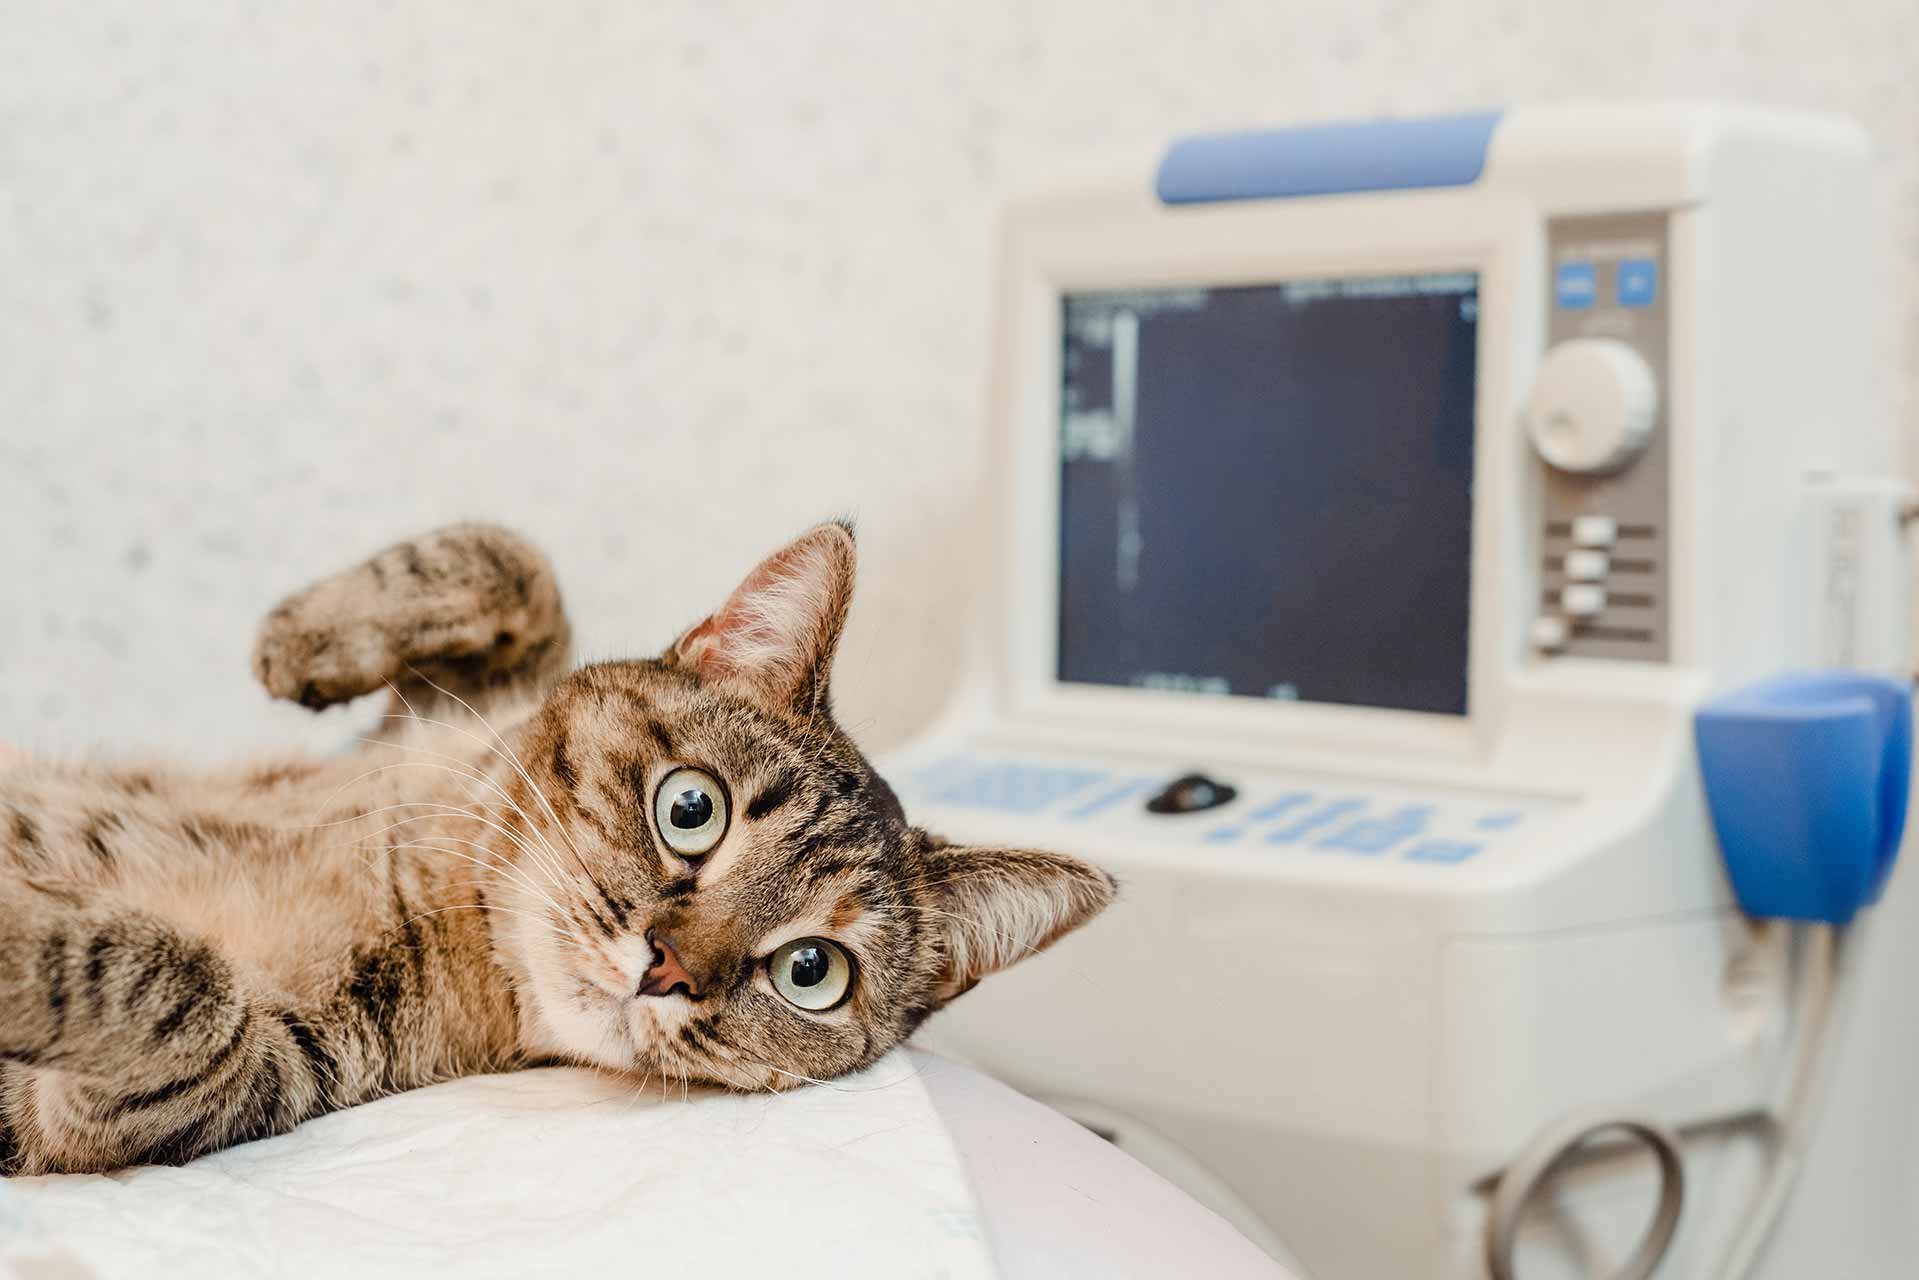 Cat lying on its back for an ultrasound while looking directly at camera